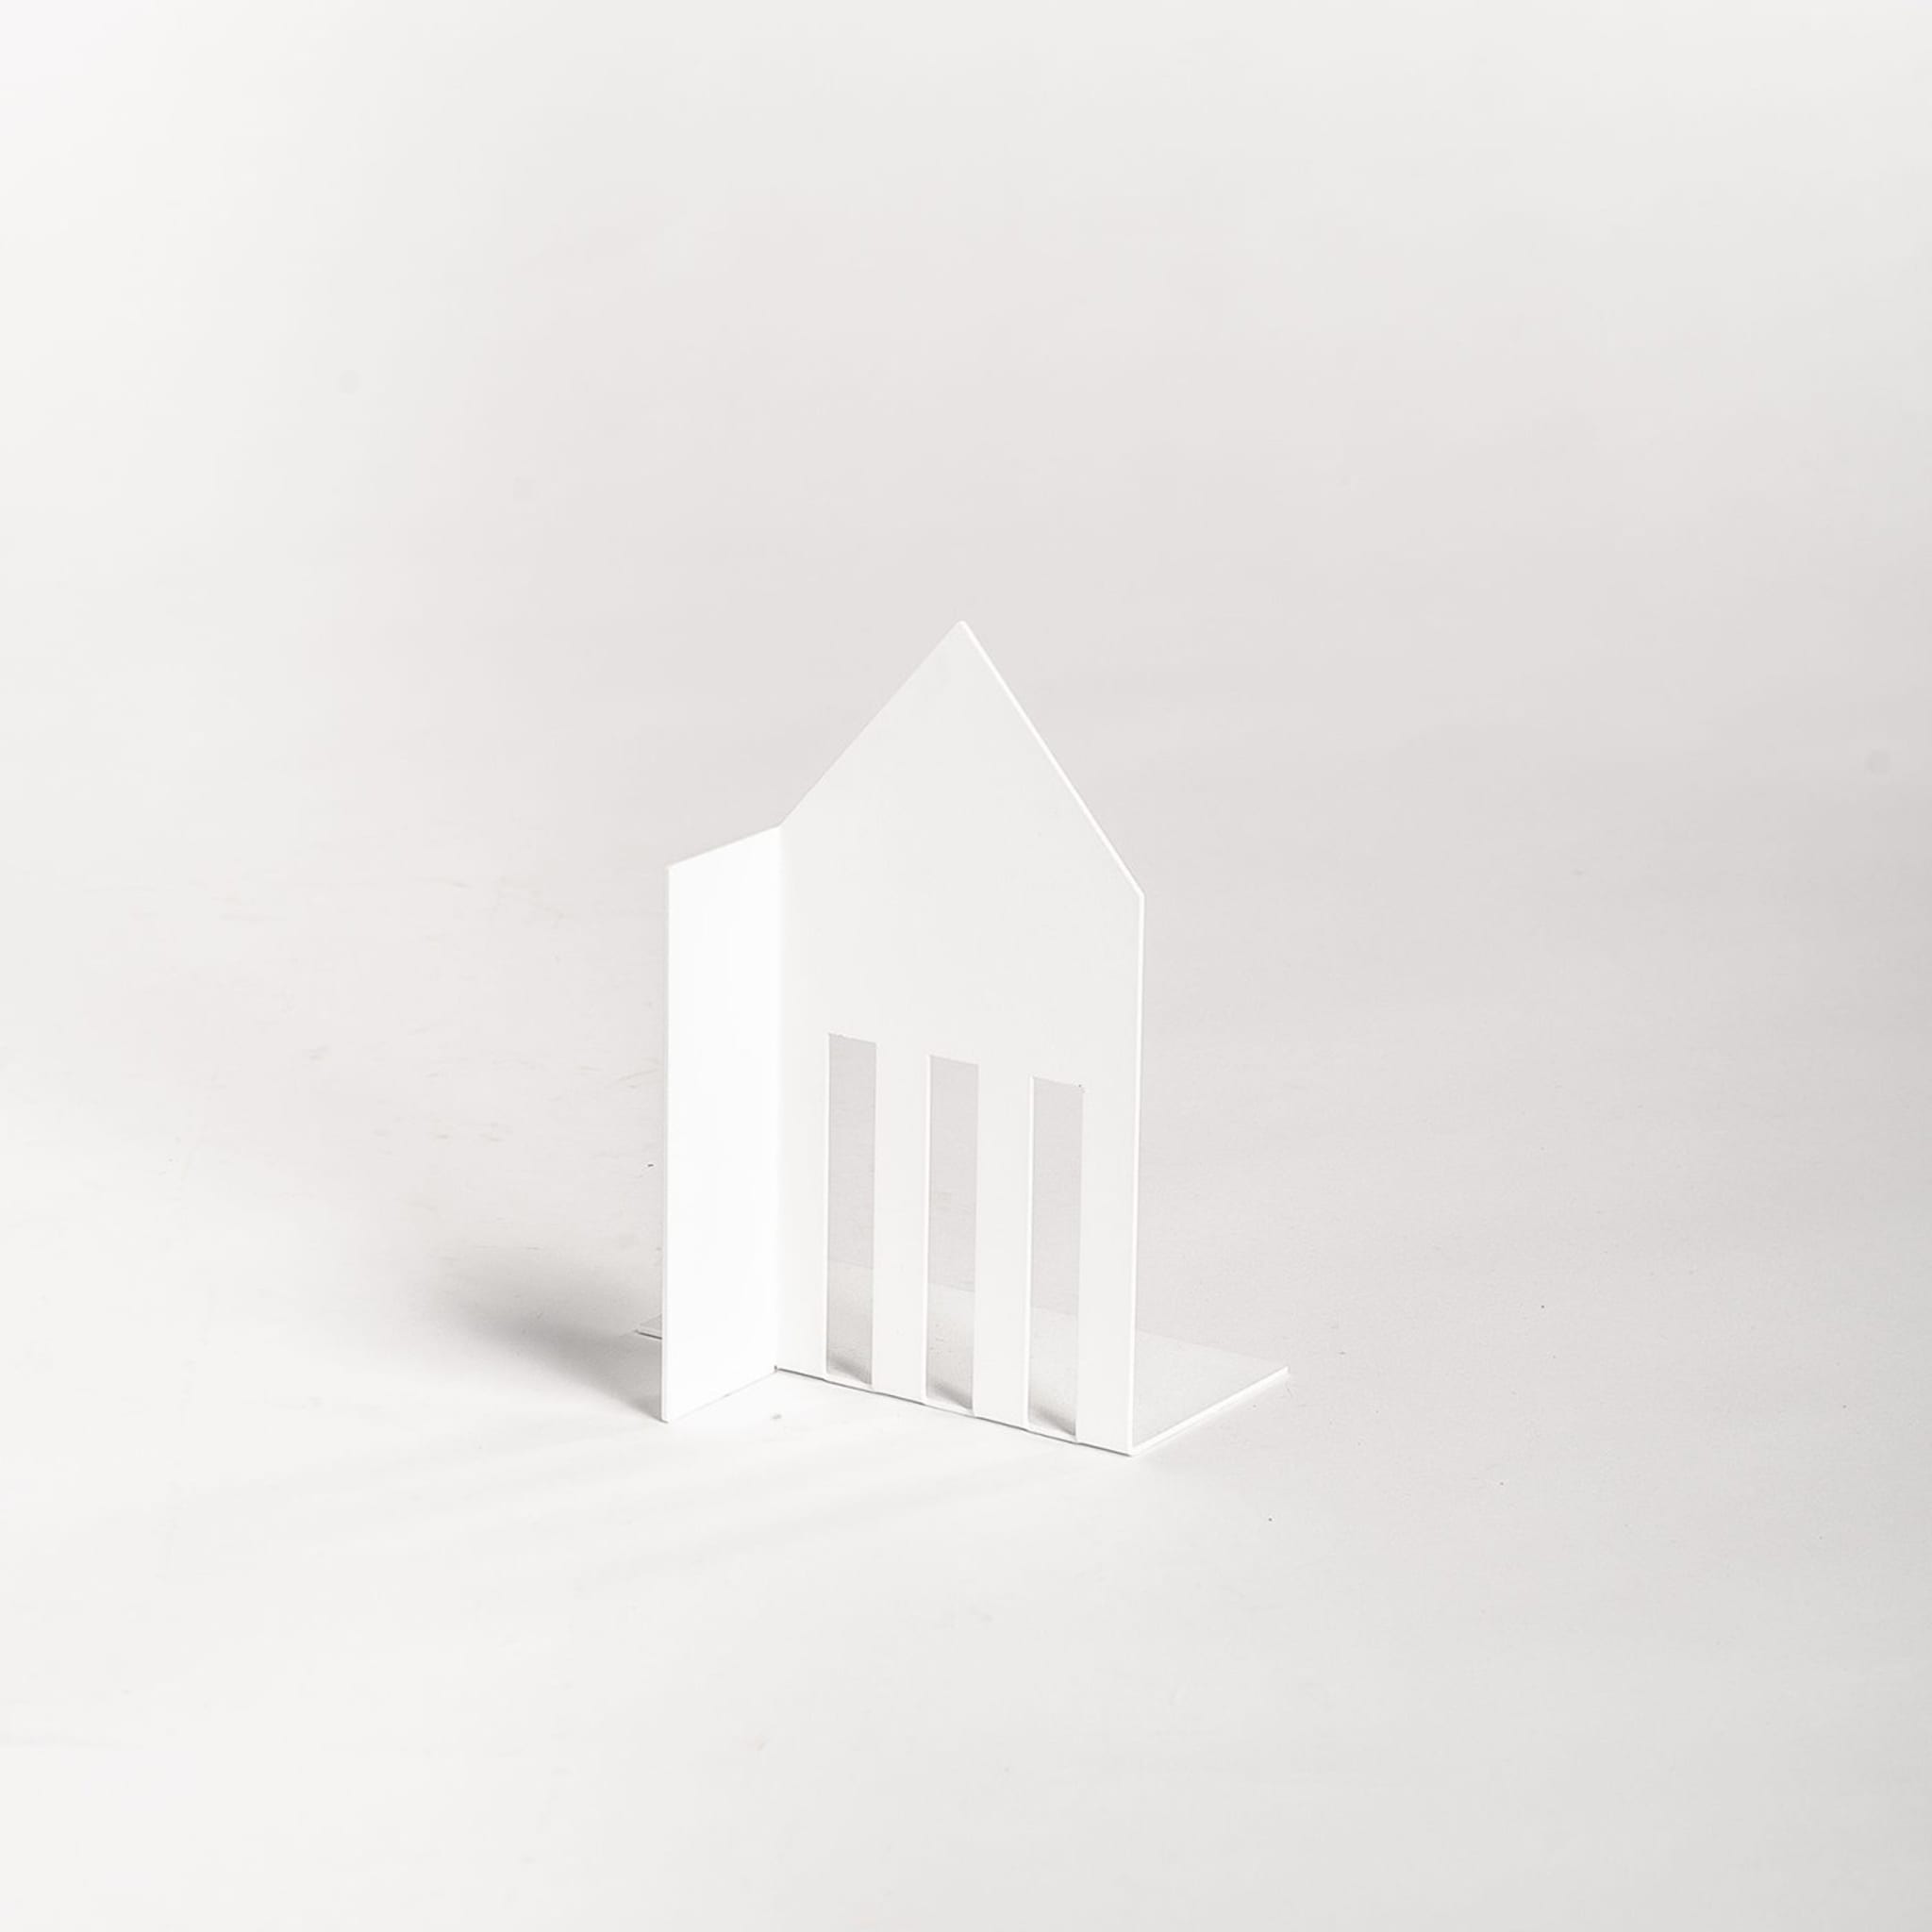 Roommate White Damasco Bookend by NÆSSI STUDIO - Alternative view 2